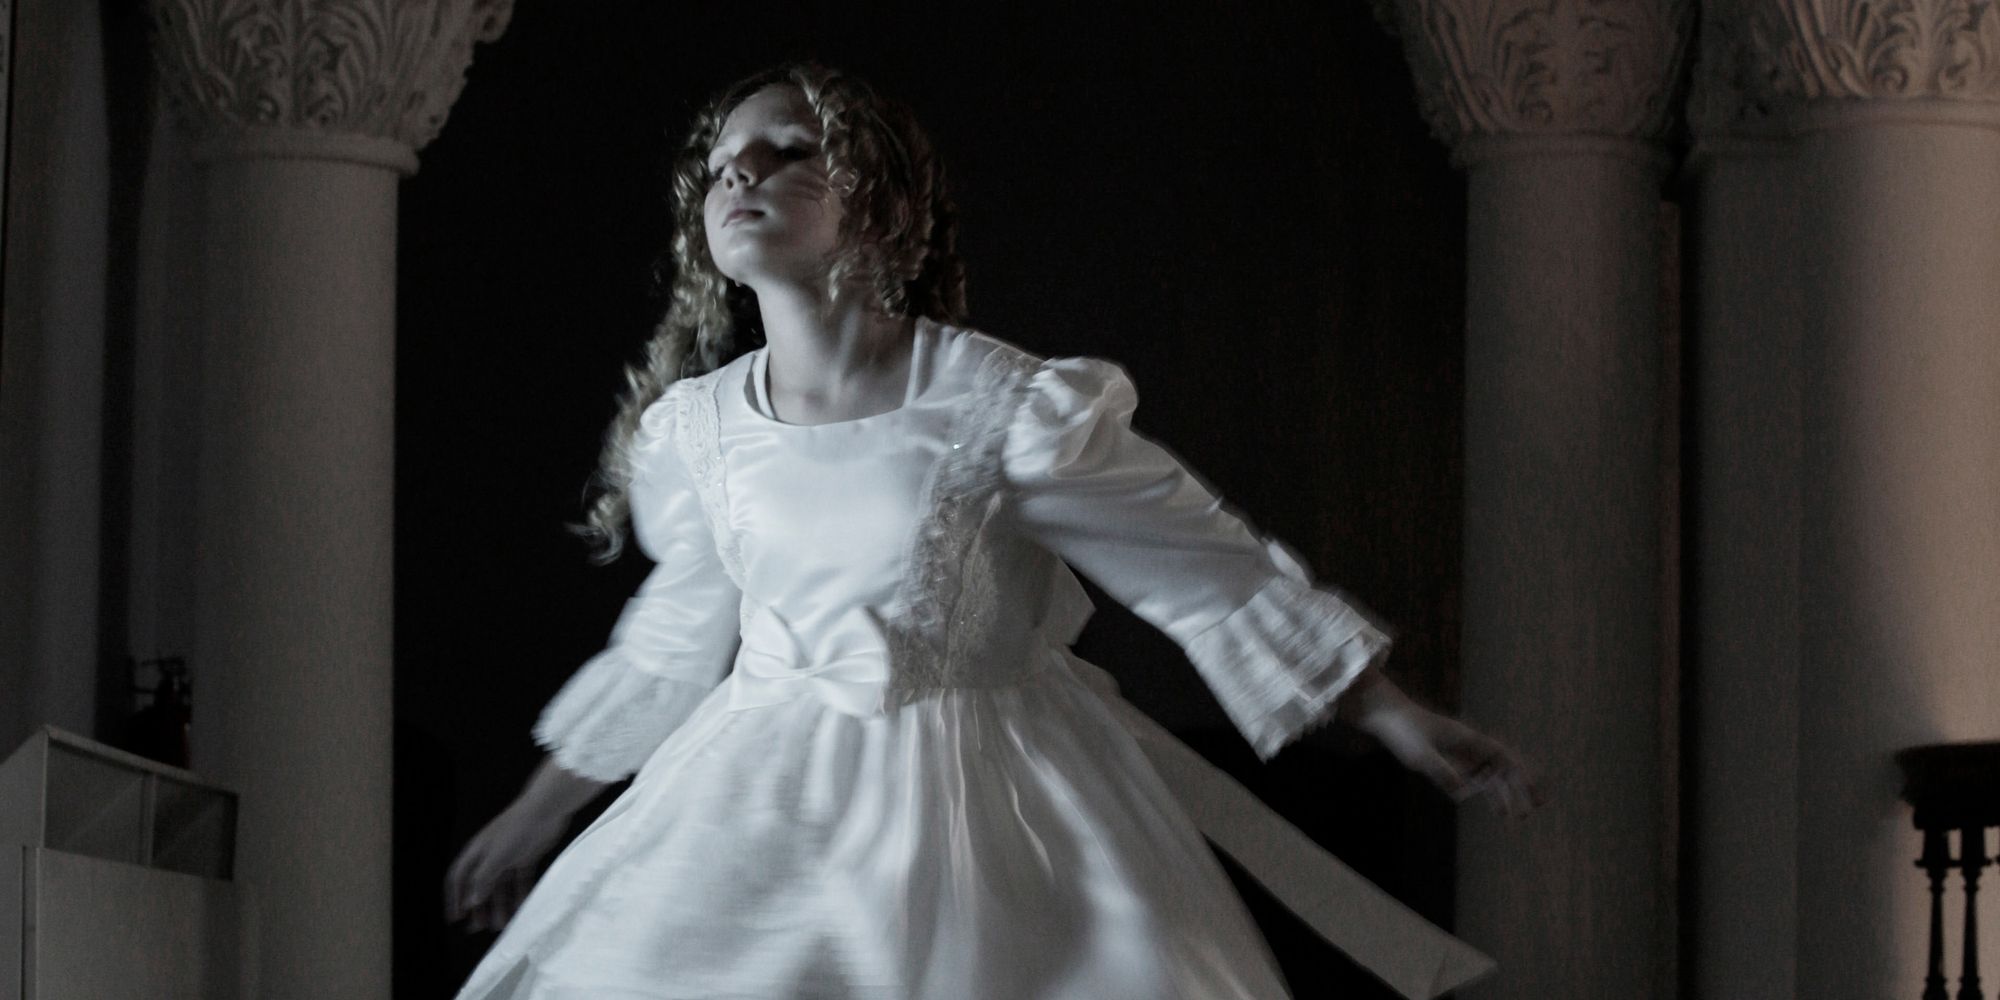 A ghostly girl spins in her party dress.